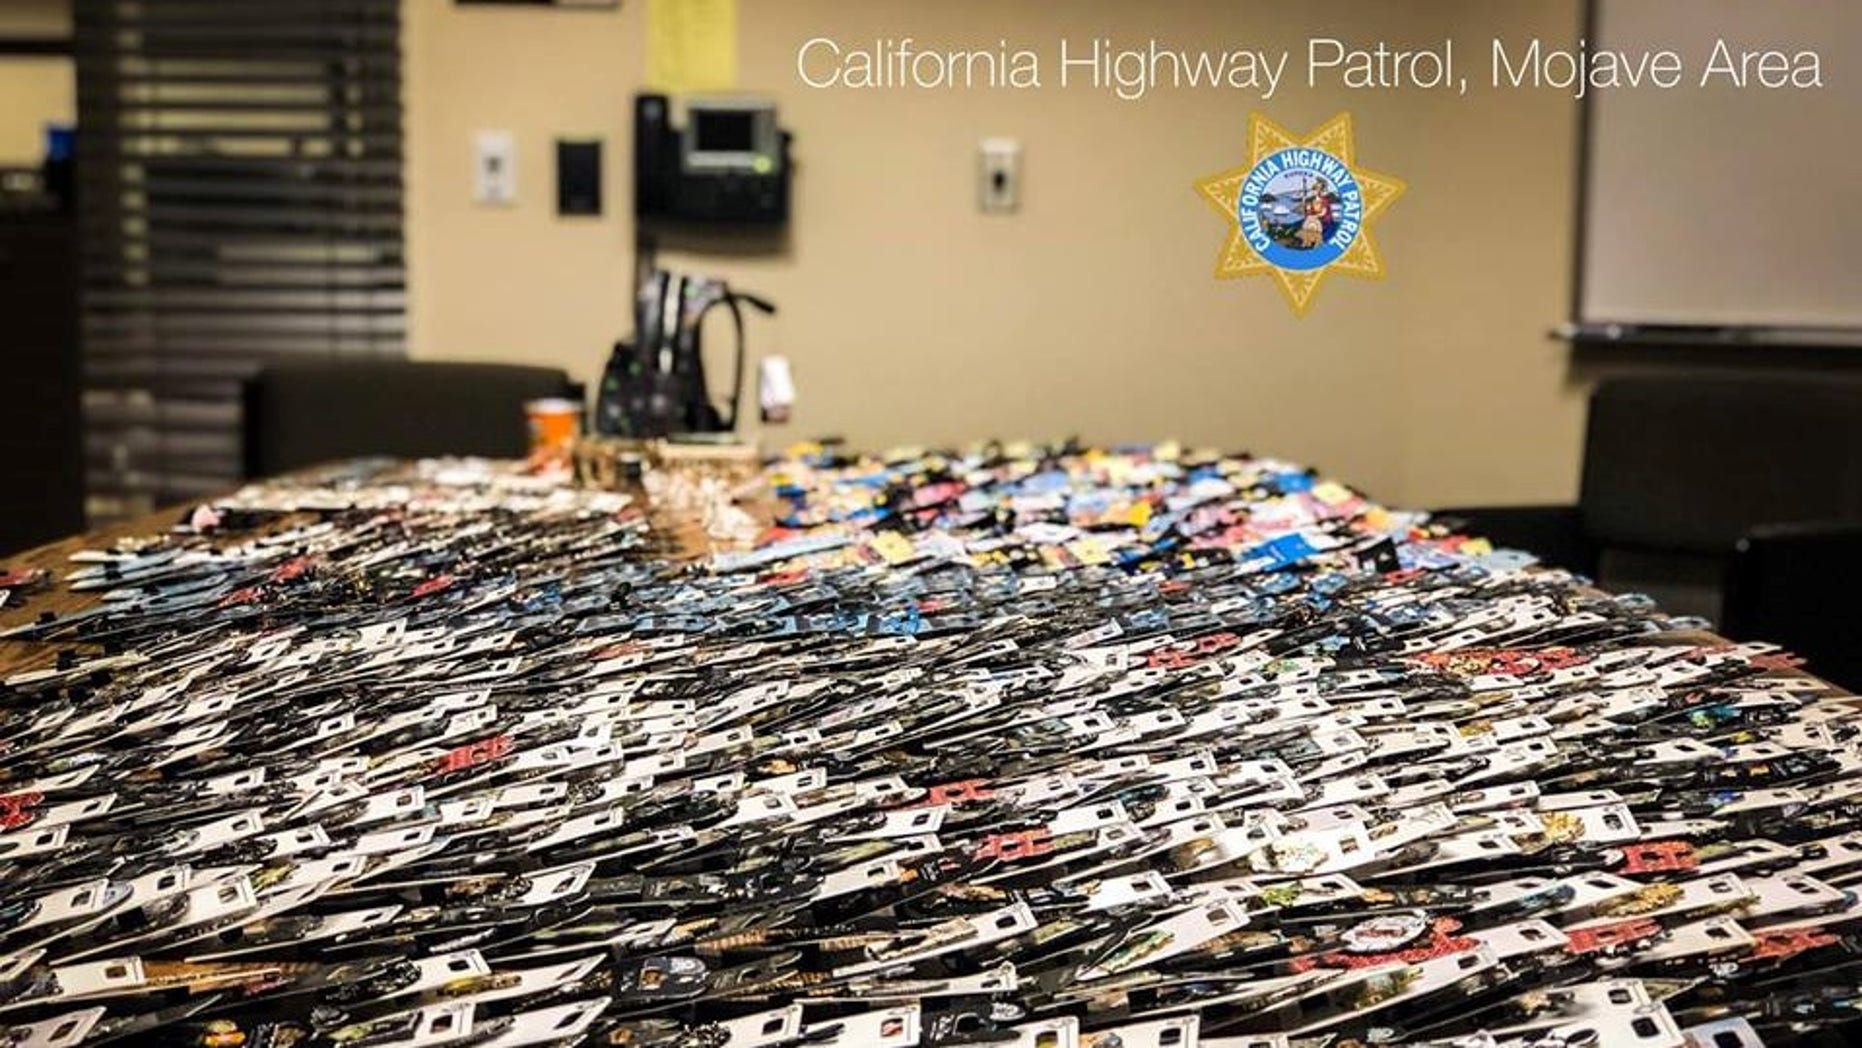 California Highway Patrol officers said they found $ 10,000 worth of goods stolen from Disneyland after they arrested a driver on Friday.